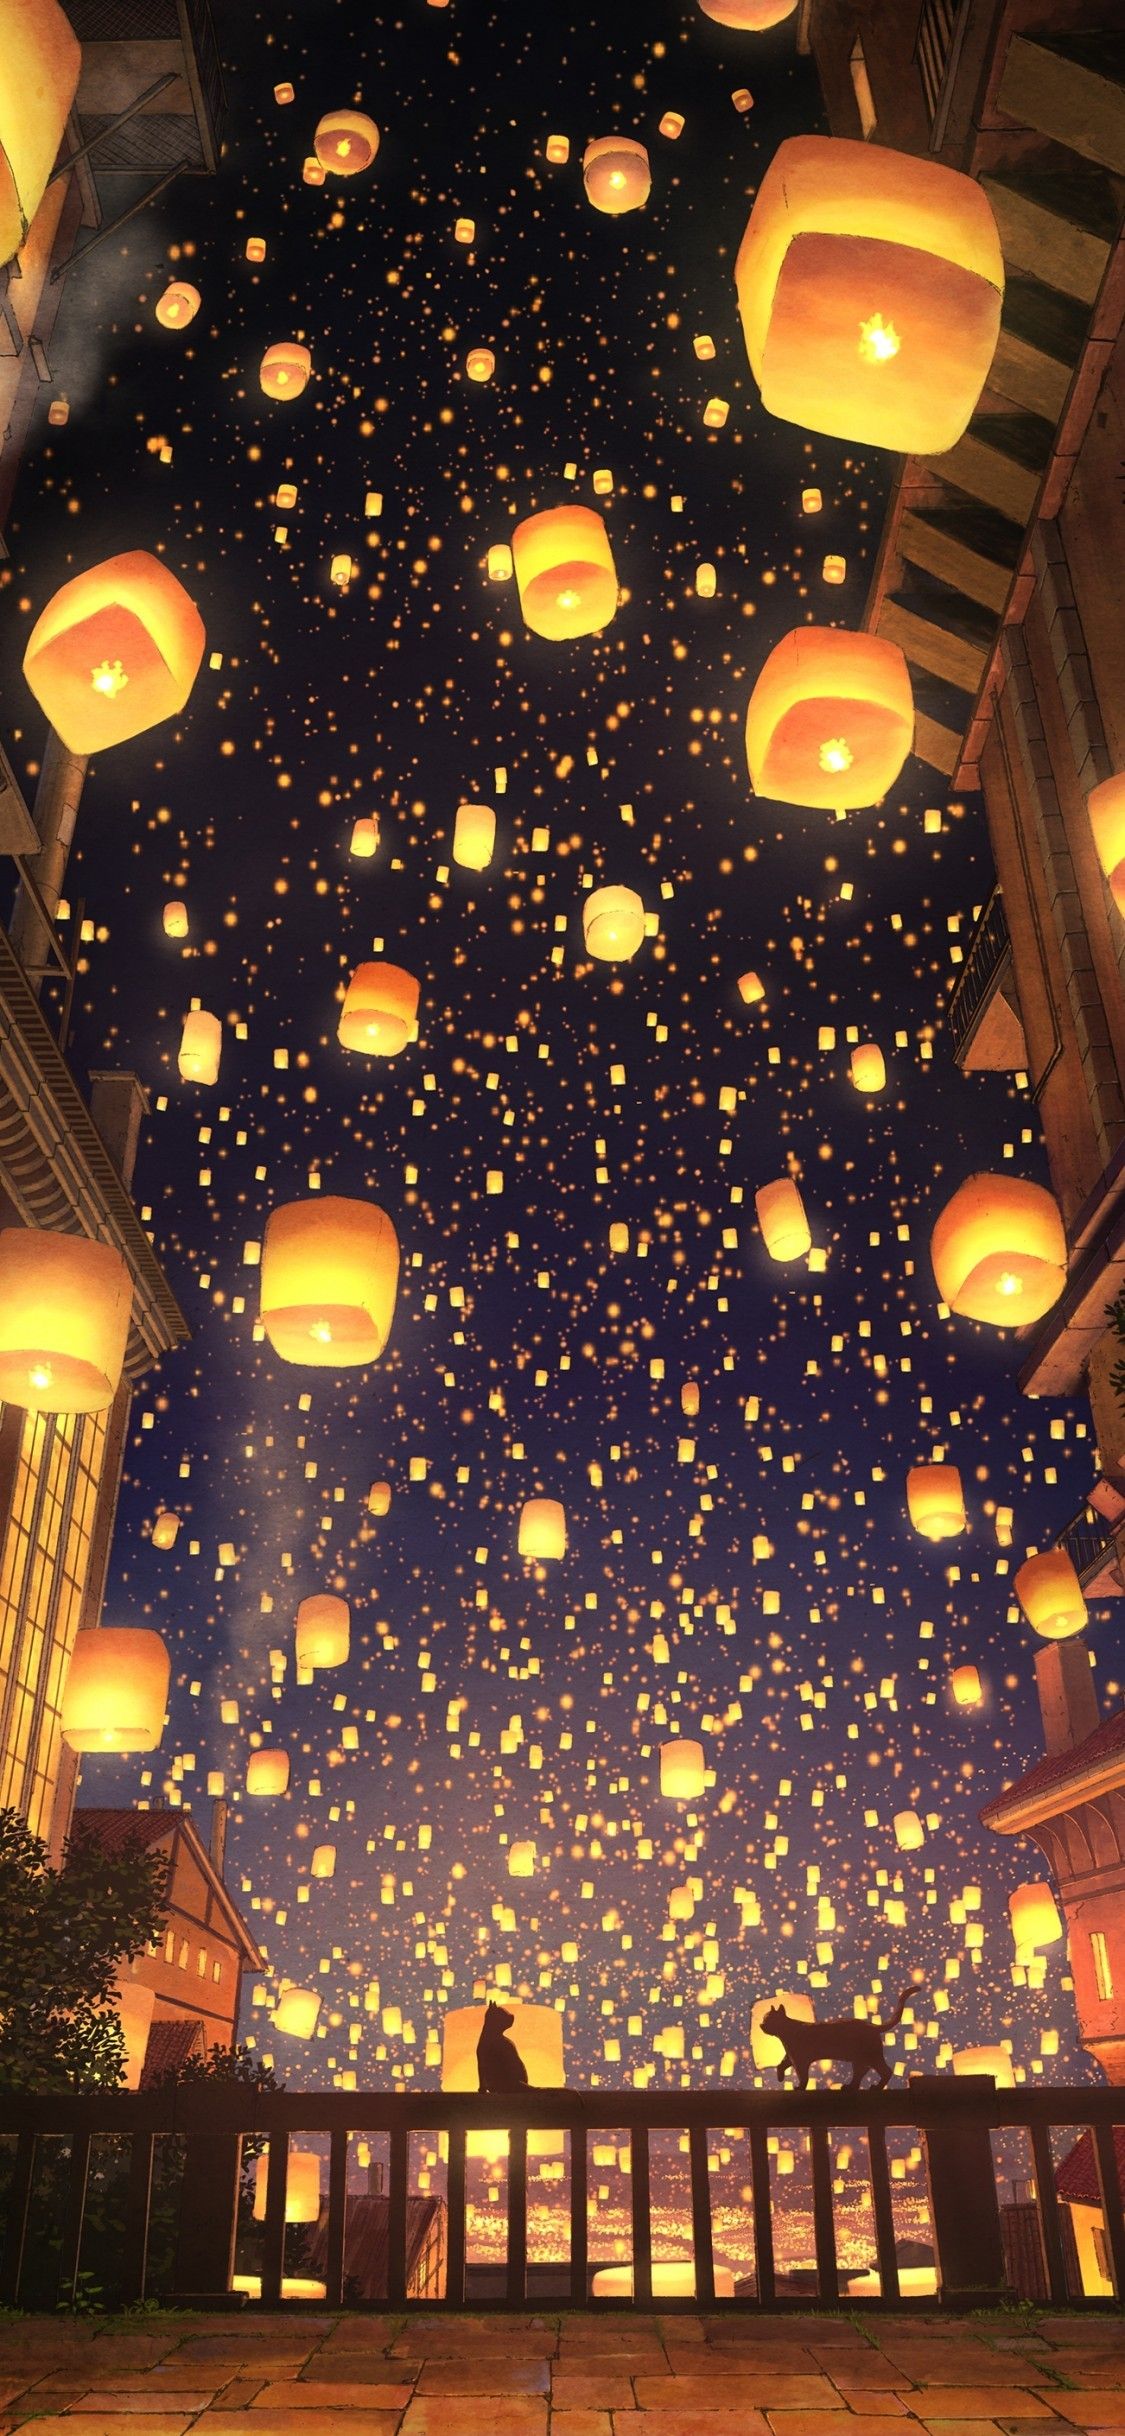 Download 1125x2436 Anime Festival, Lanterns, Night, Fence, Scenic, Cats, Mood Wallpaper for iPhone 11 Pro & X